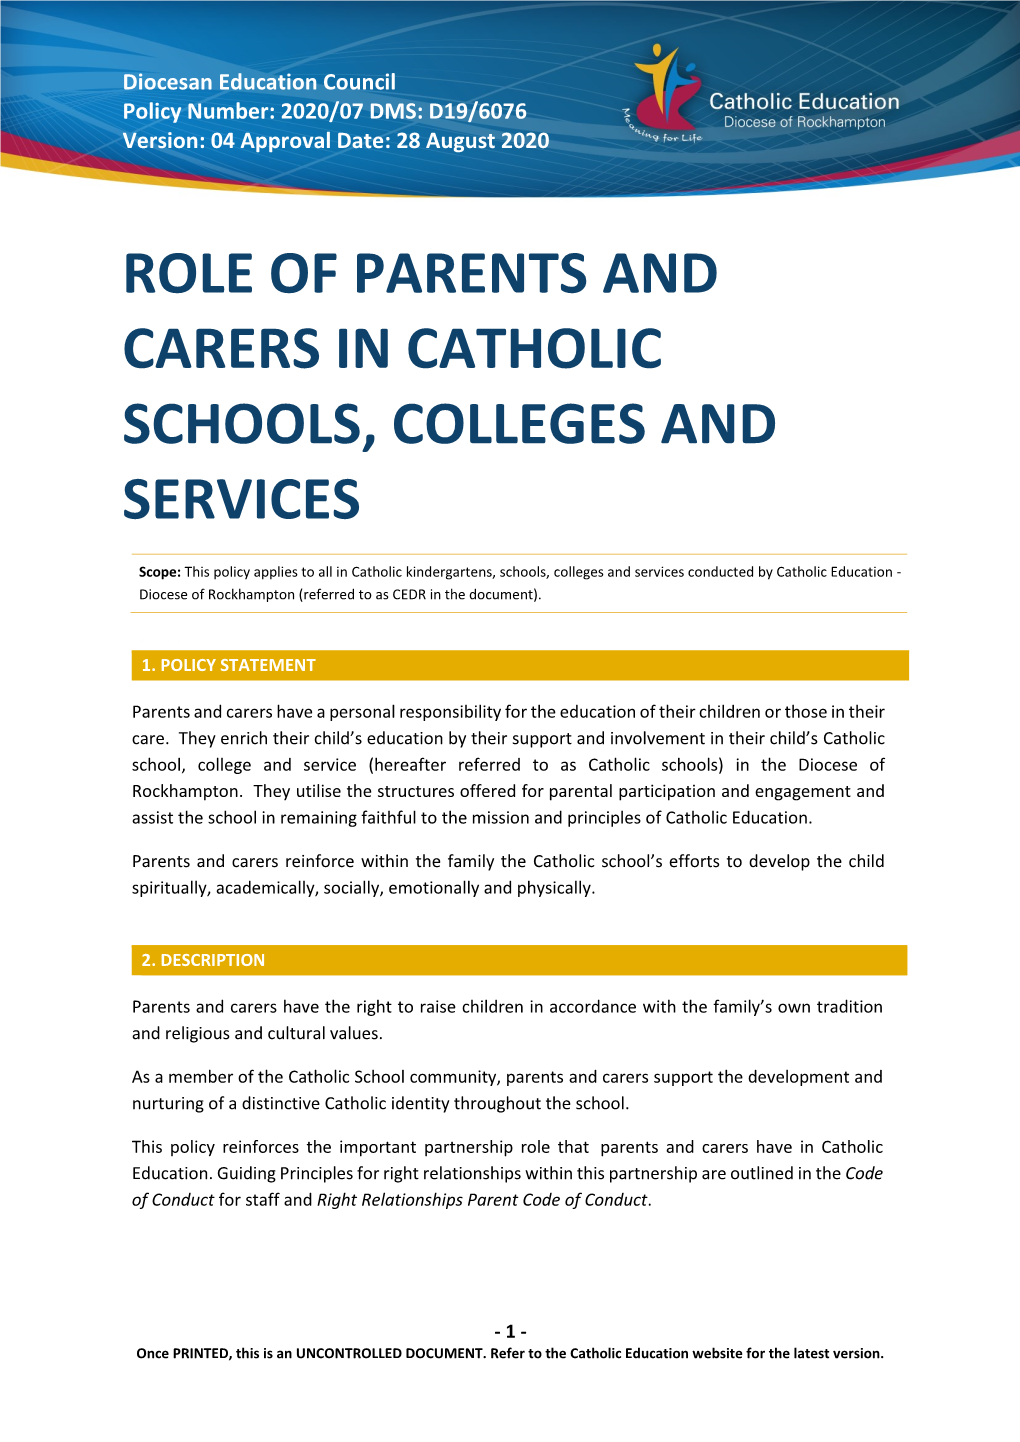 Role of Parents and Carers in Catholic Schools, Colleges and Services